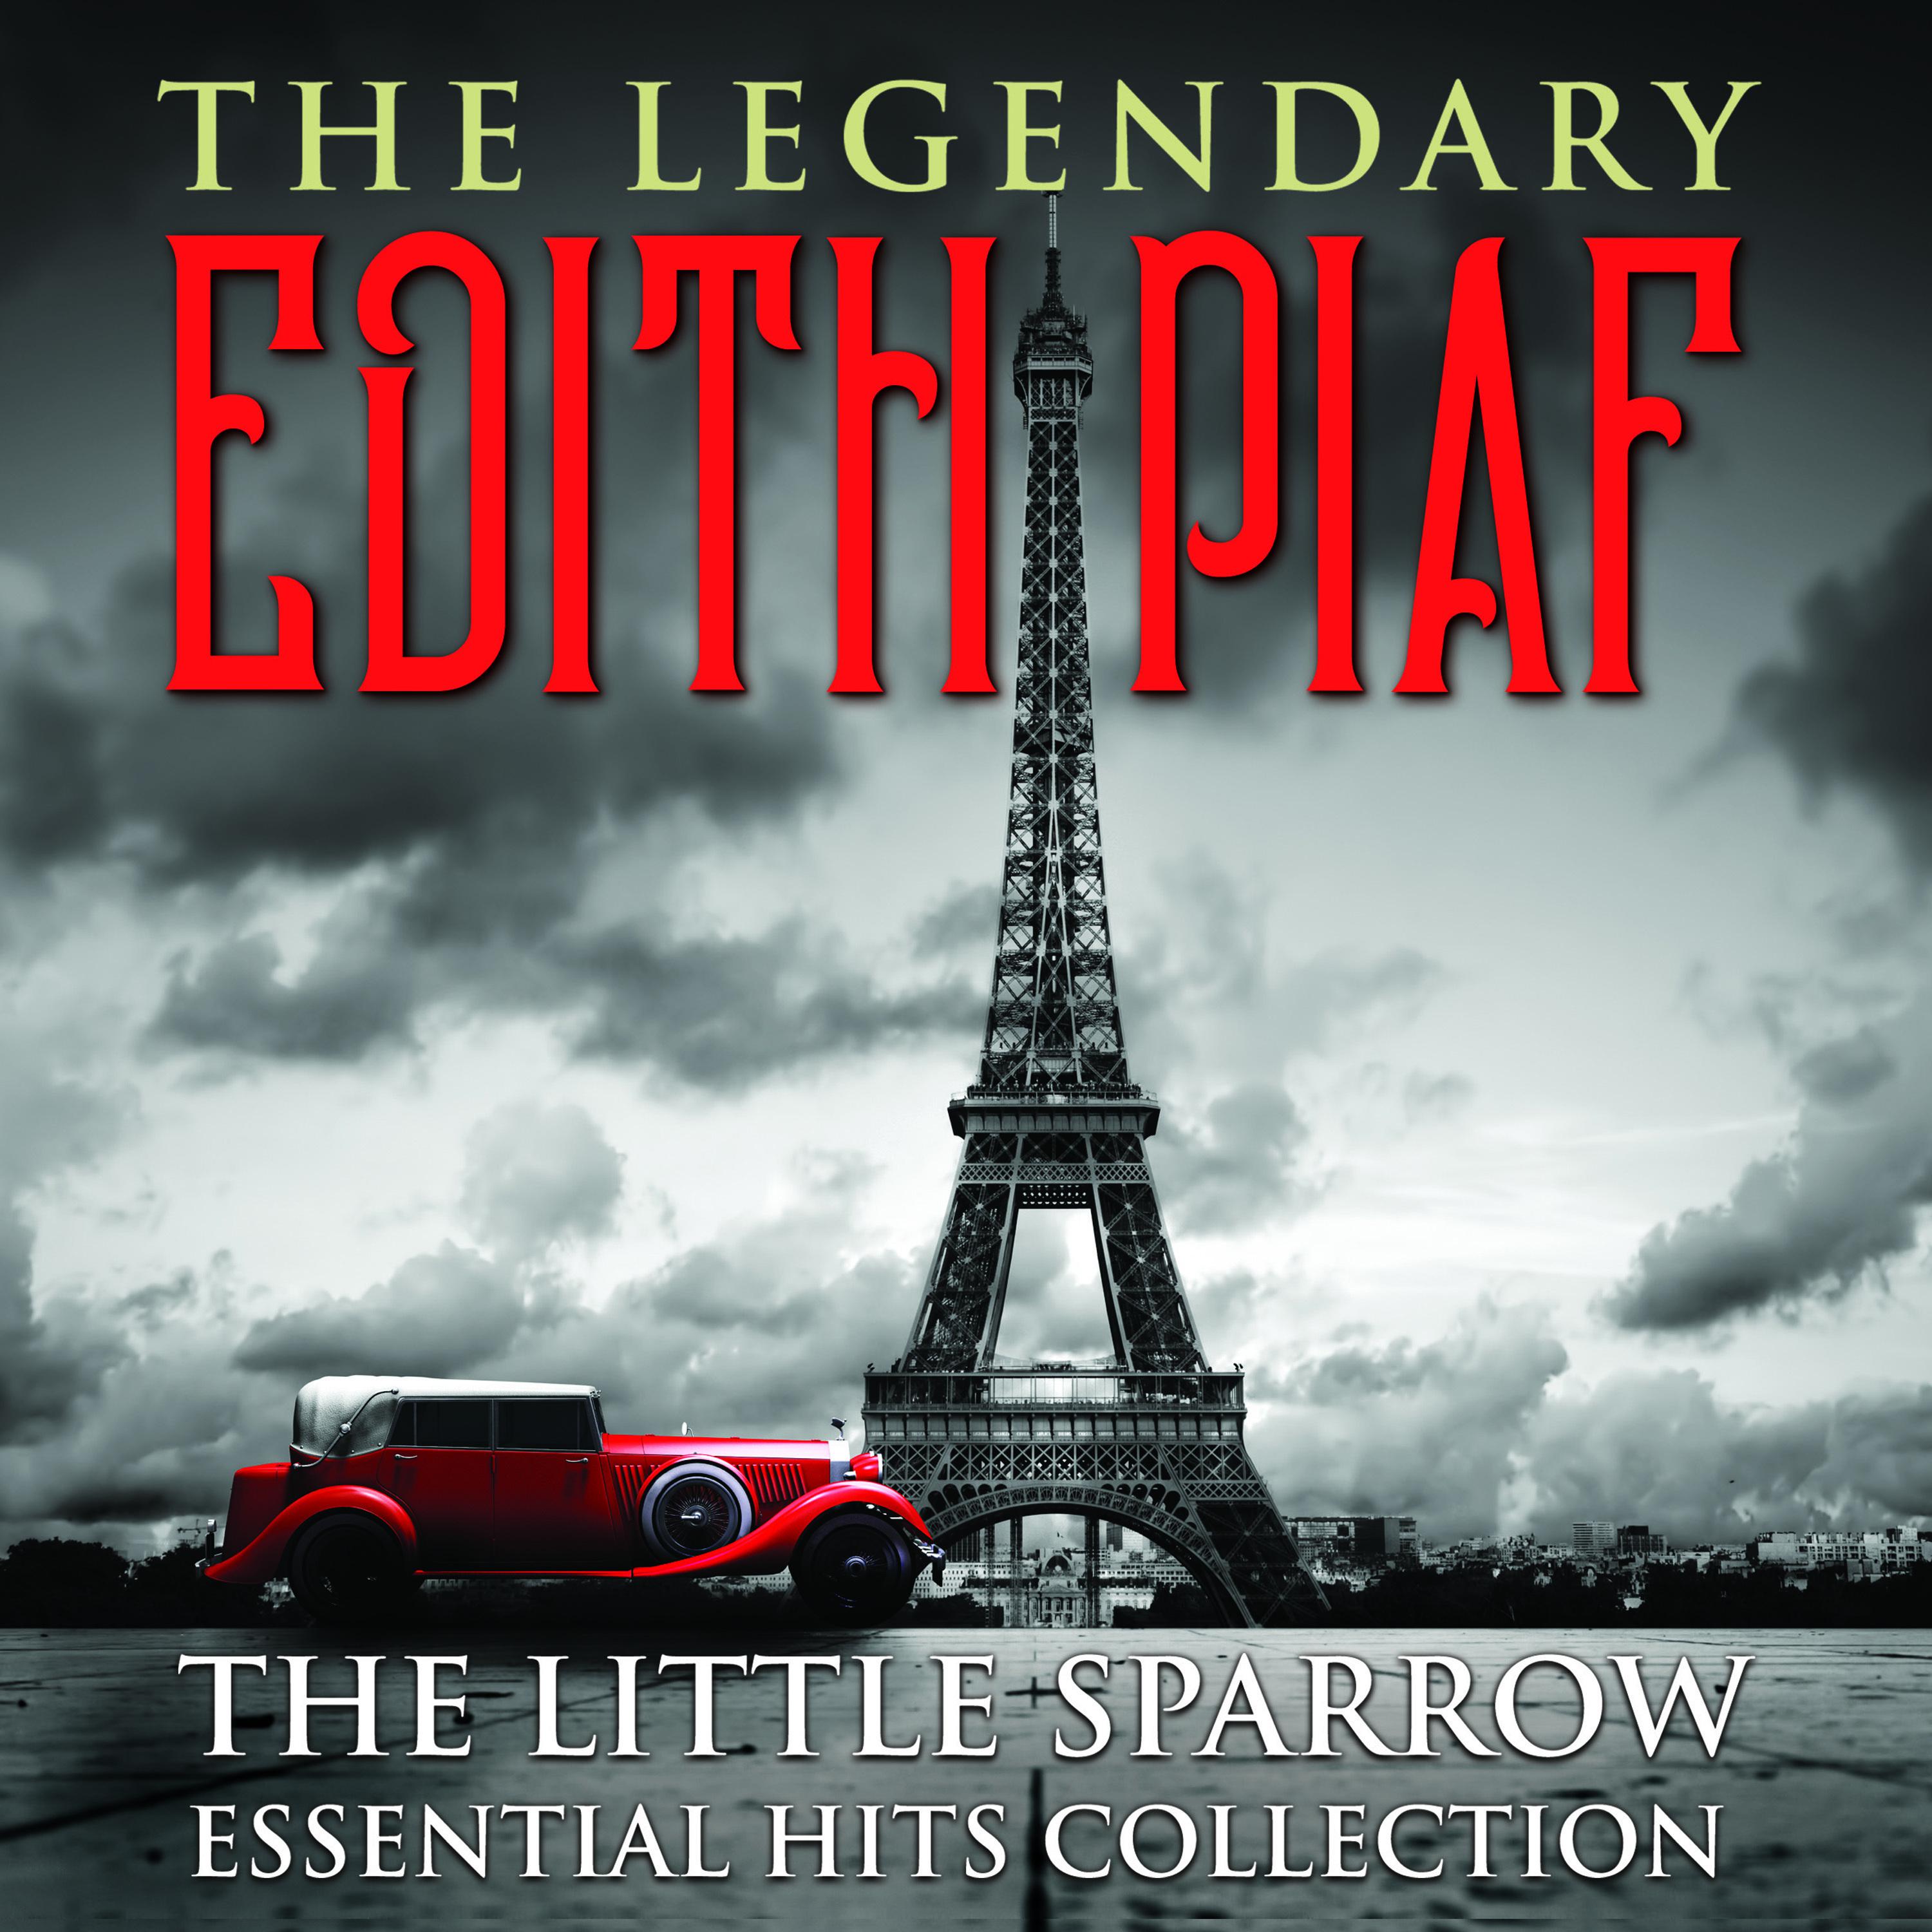 THE LEGENDARY EDITH PIAF - The Little Sparrow Essential Hits Collection